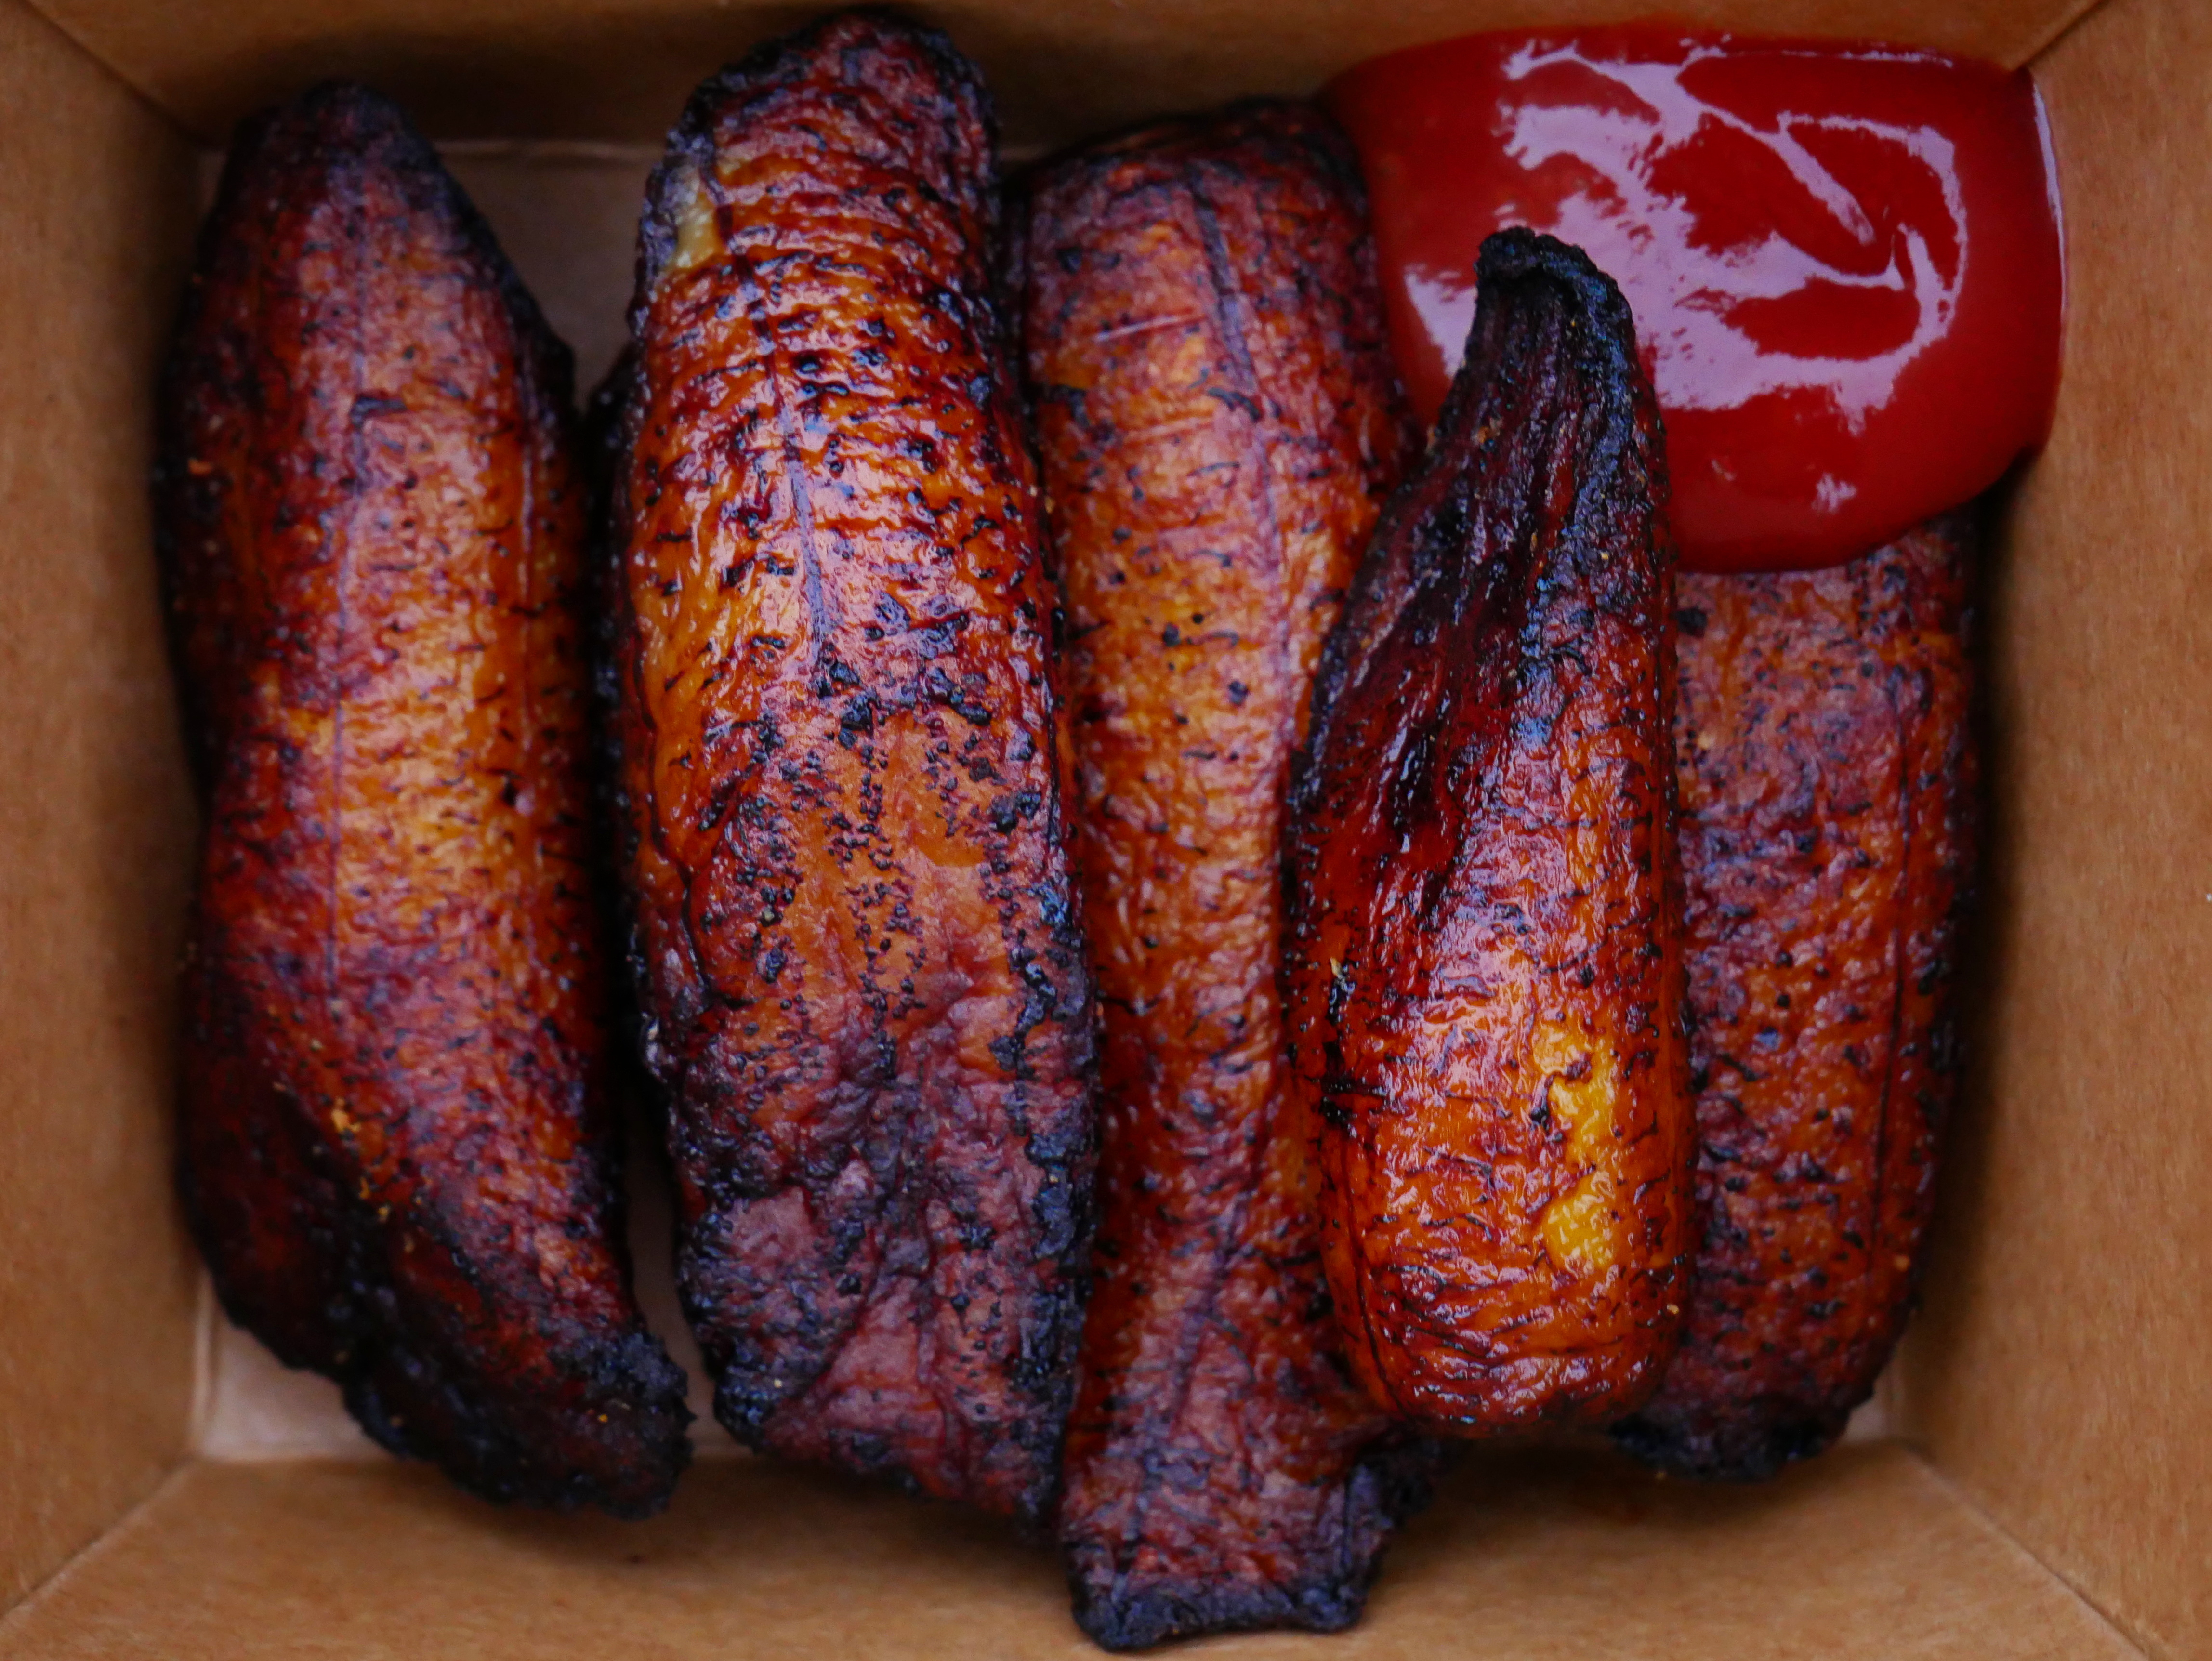 Cooked plantains.